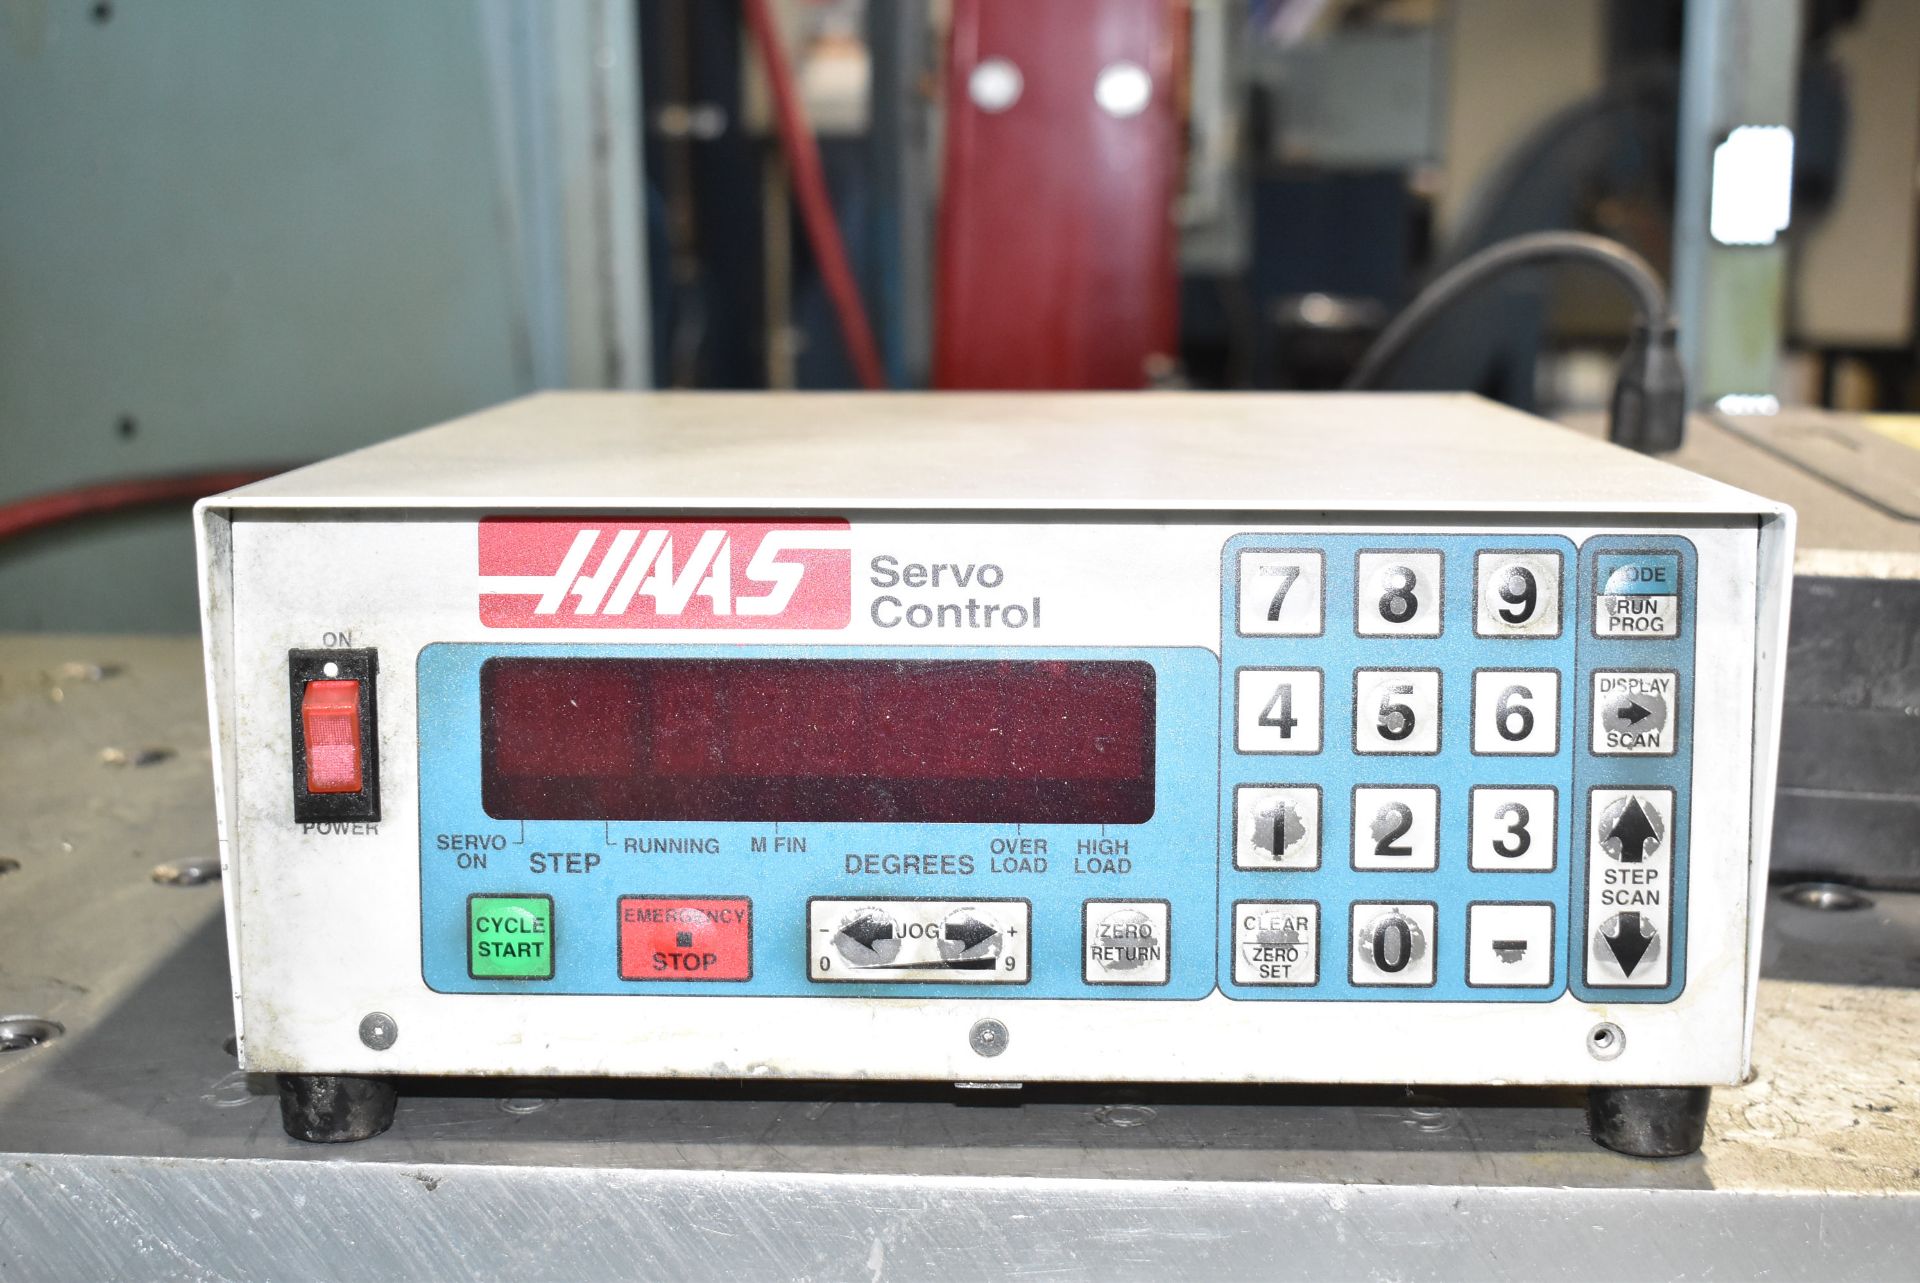 HAAS 4TH AXIS WITH TAILSTOCK & HAAS SERVO CONTROL, S/N 932611 (CI) - Image 7 of 9